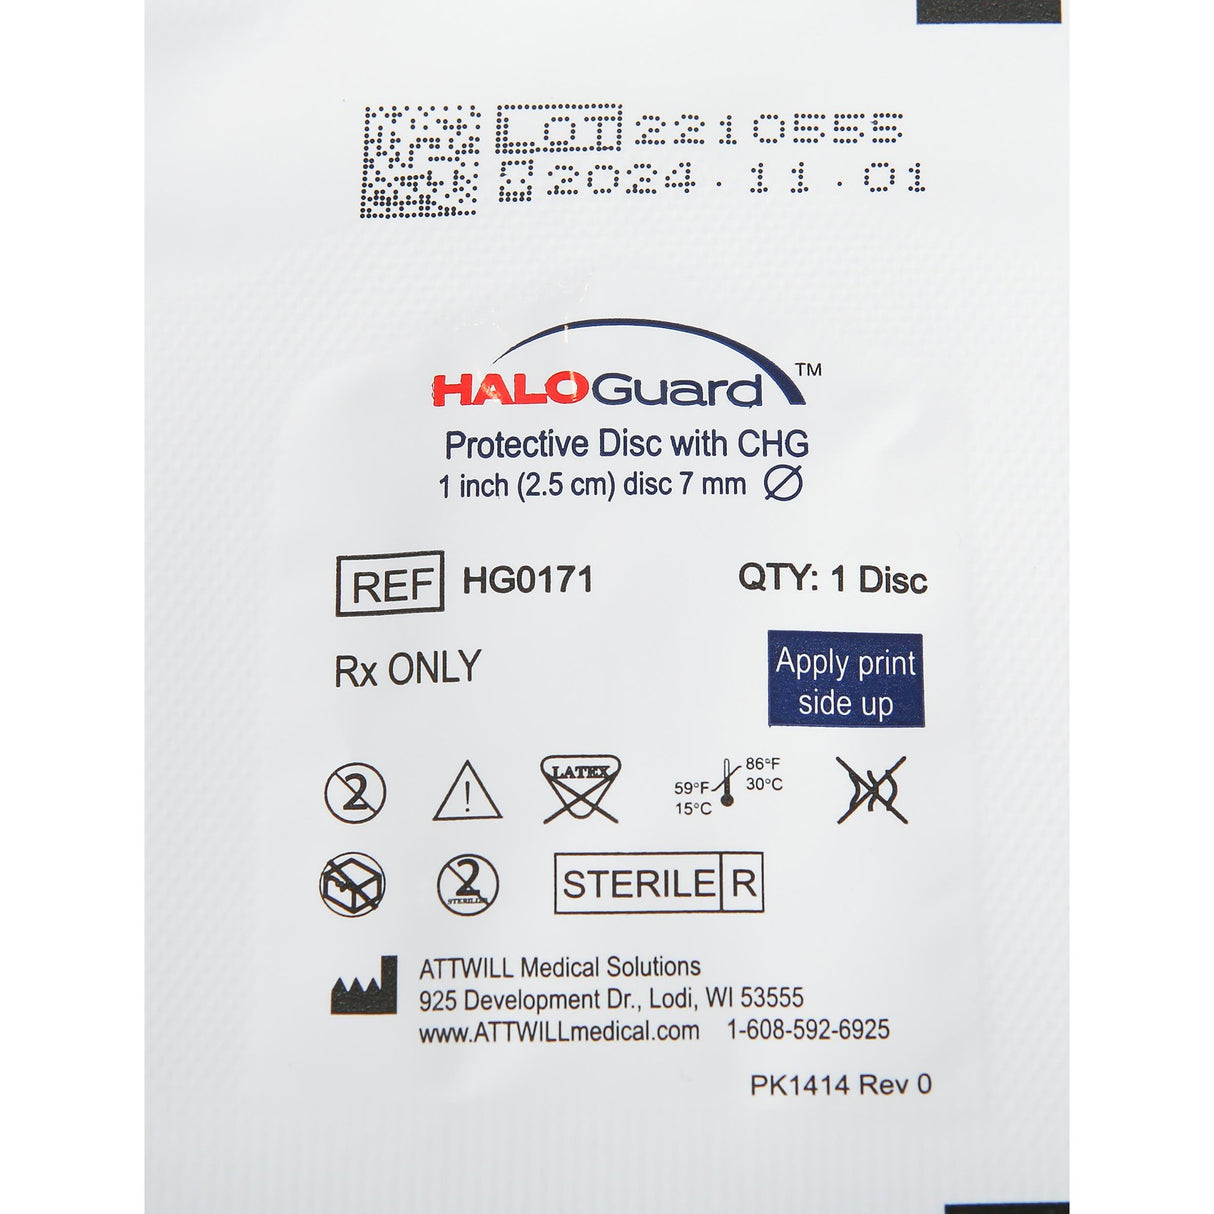 HaloGUARD™ 7mm Protective Disk with CHG